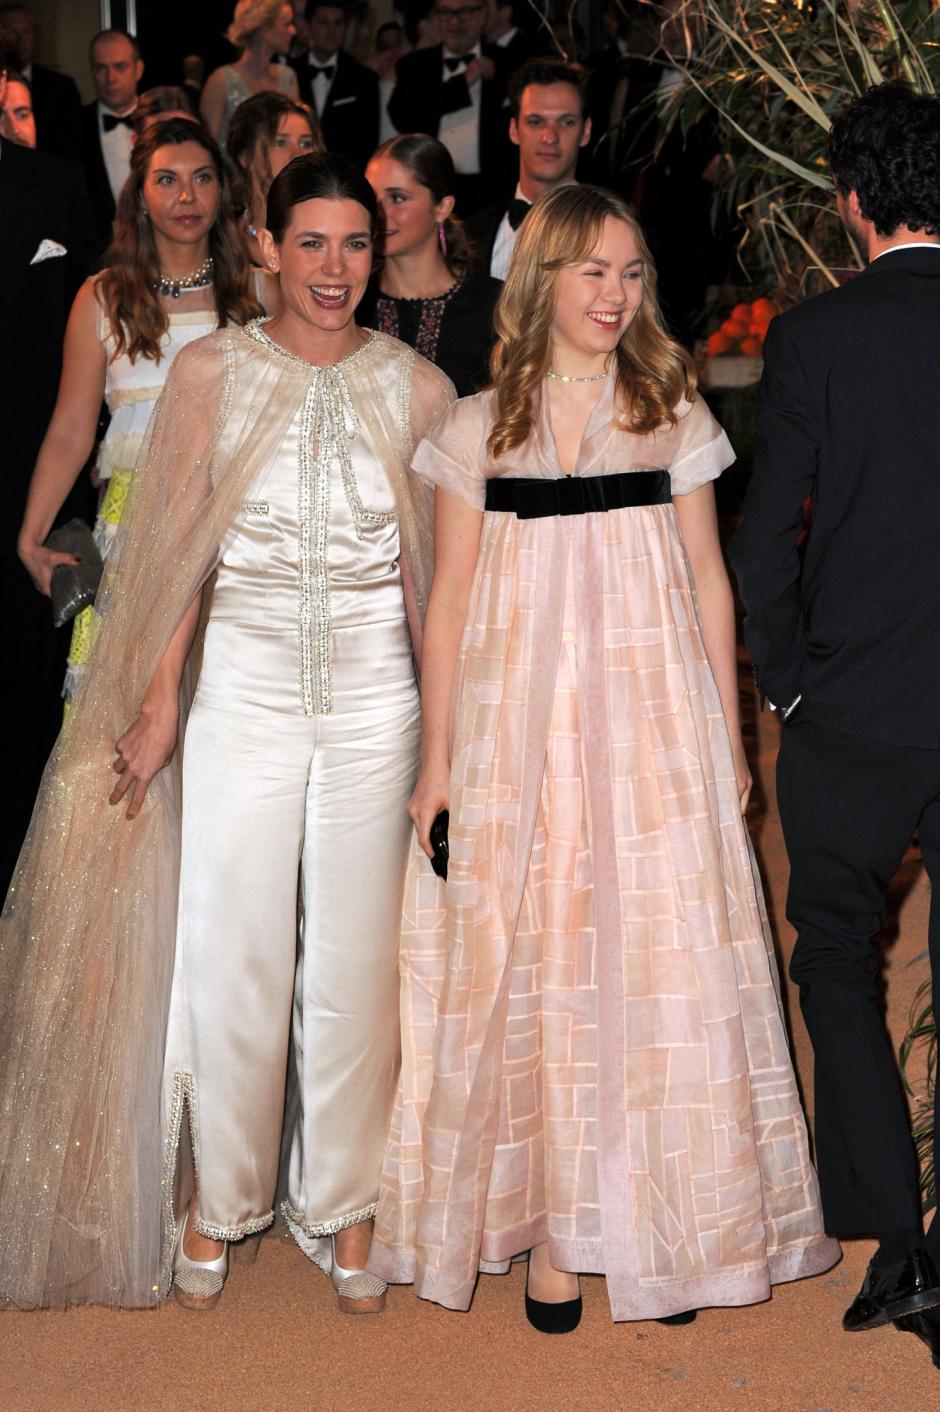 Charlotte Casiraghi and Alexandra de Hanover during 2016 Rose ball in Monaco on 20 March 2016